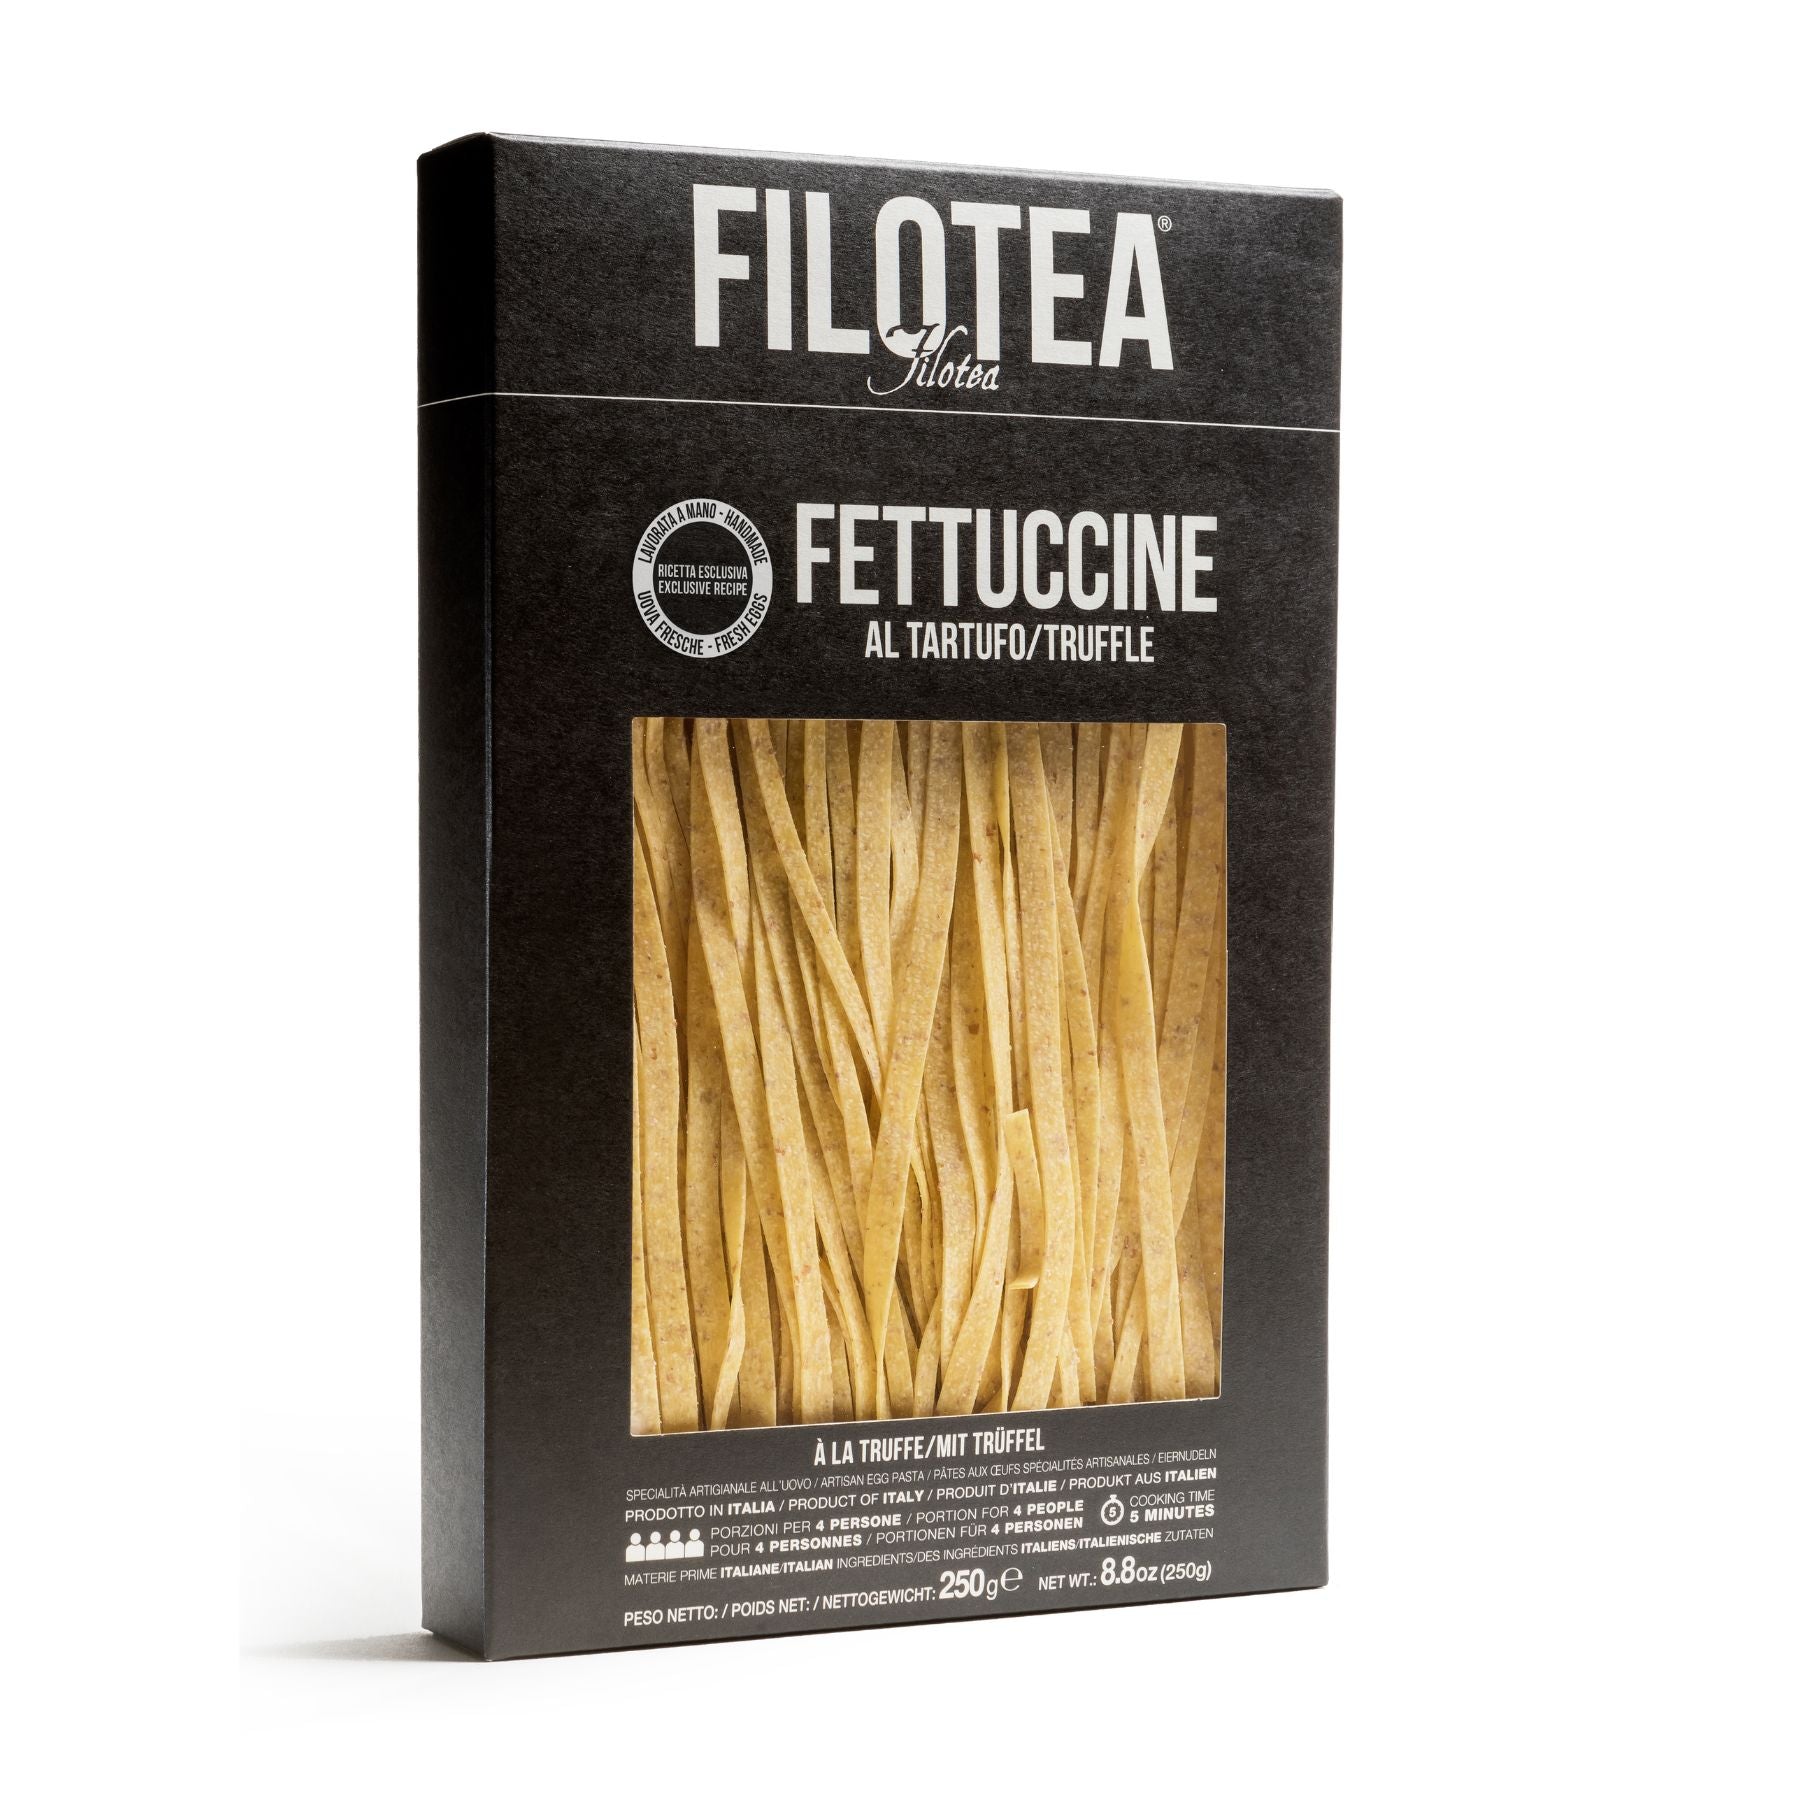 Filotea Truffle Fettuccine Artisan Egg Pasta 250g | Imported and distributed in the UK by Just Gourmet Foods